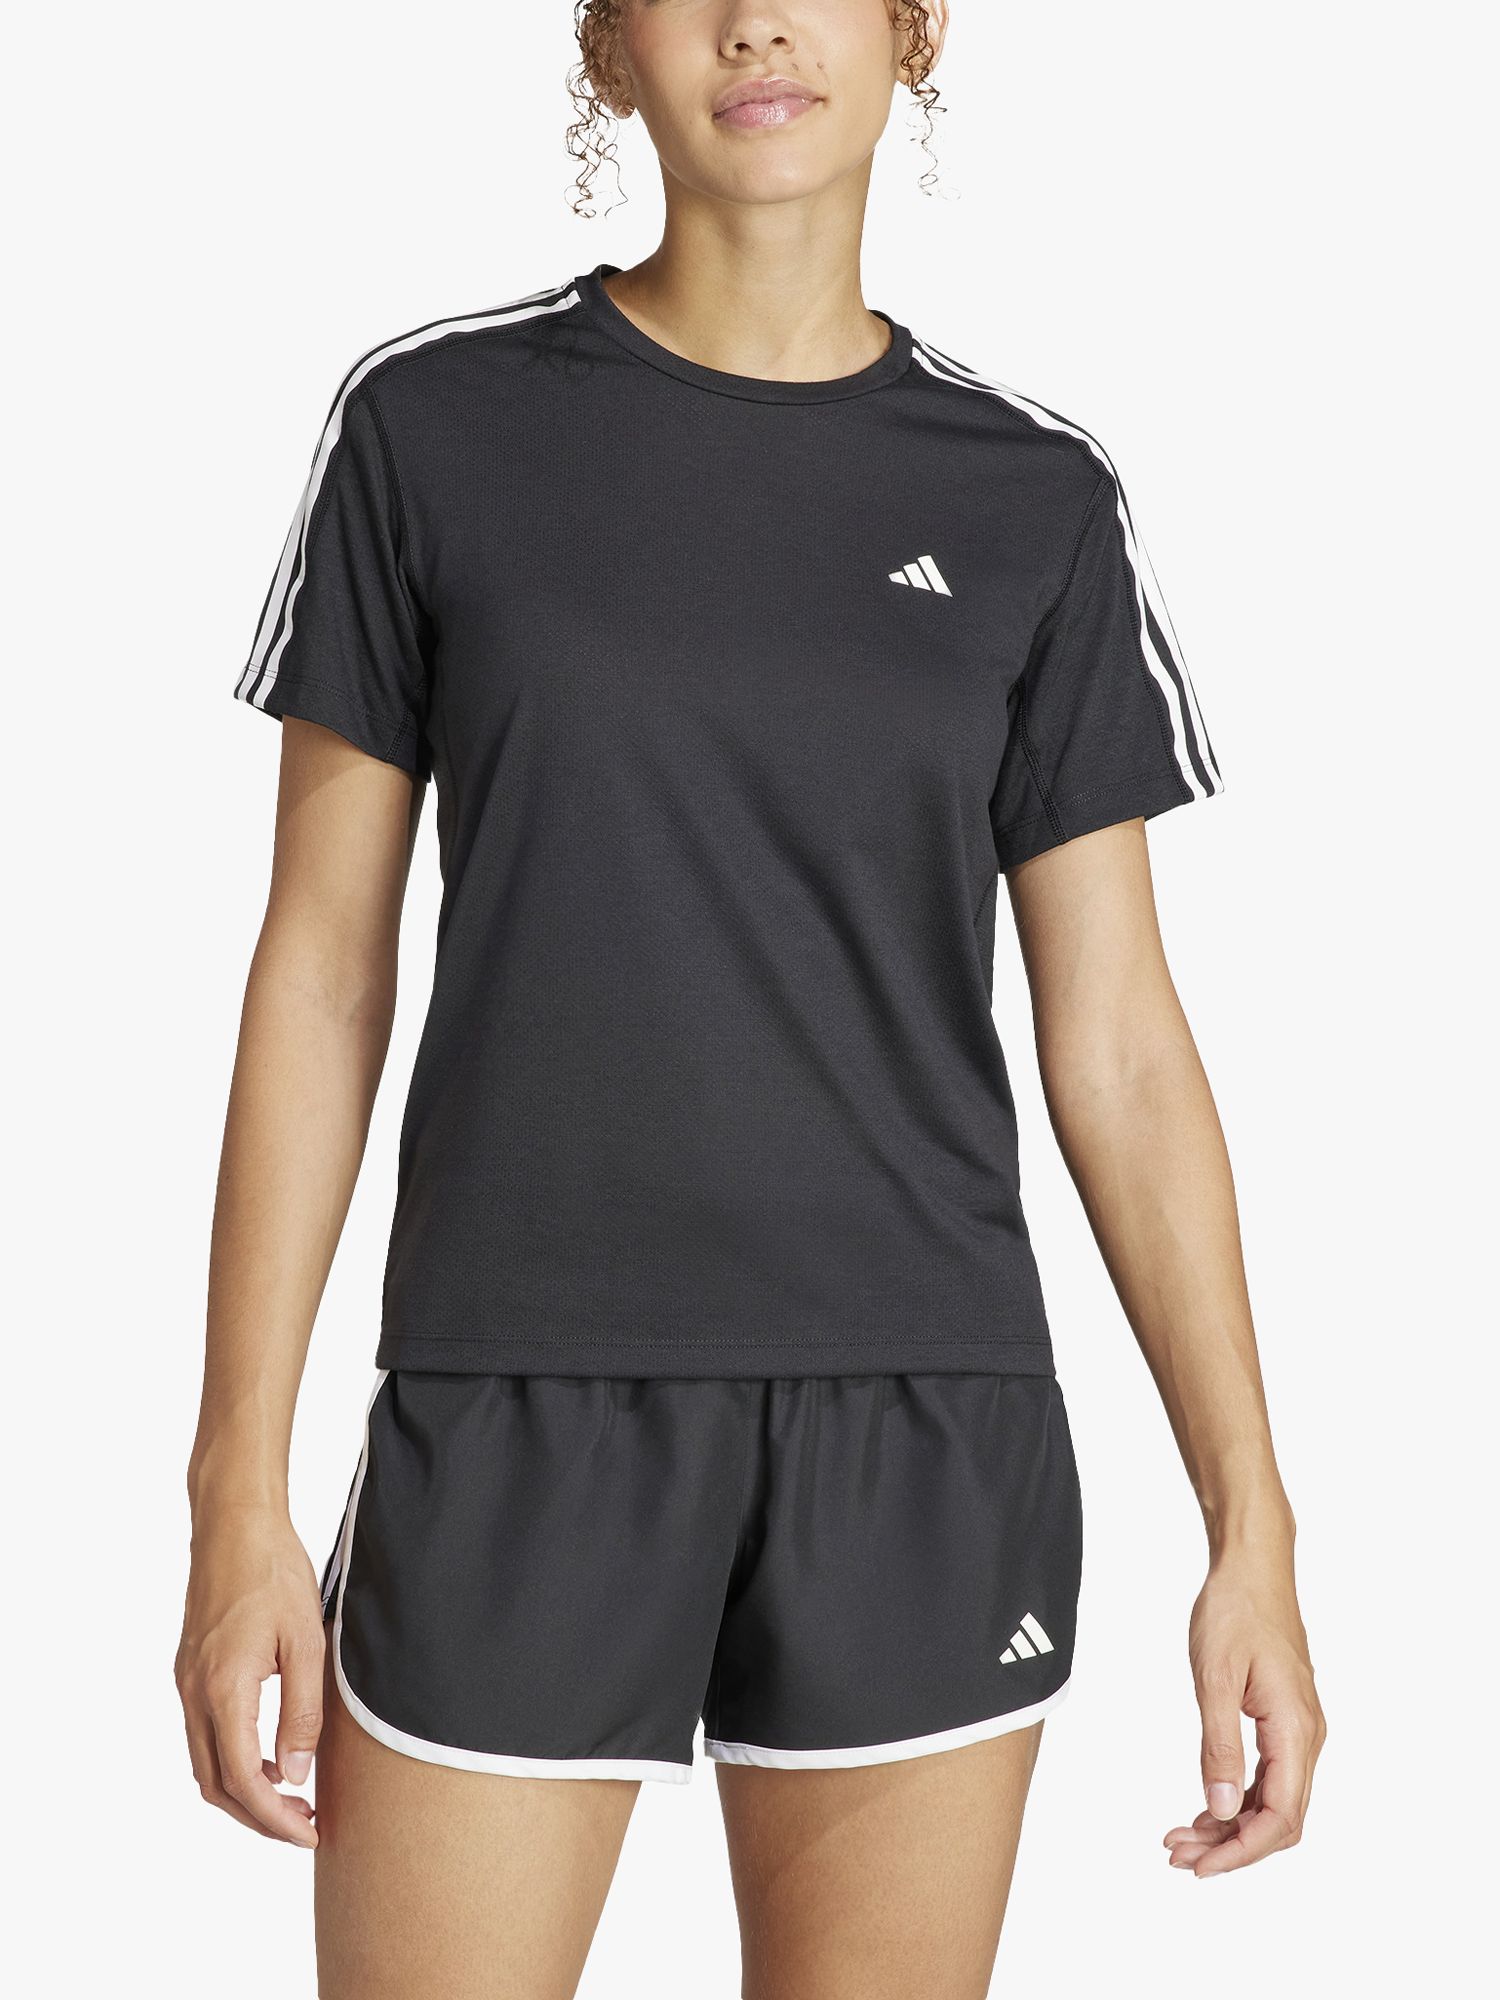 adidas Own The Run 3 Stripes Short Sleeve Recycled Running Top, Black, XS